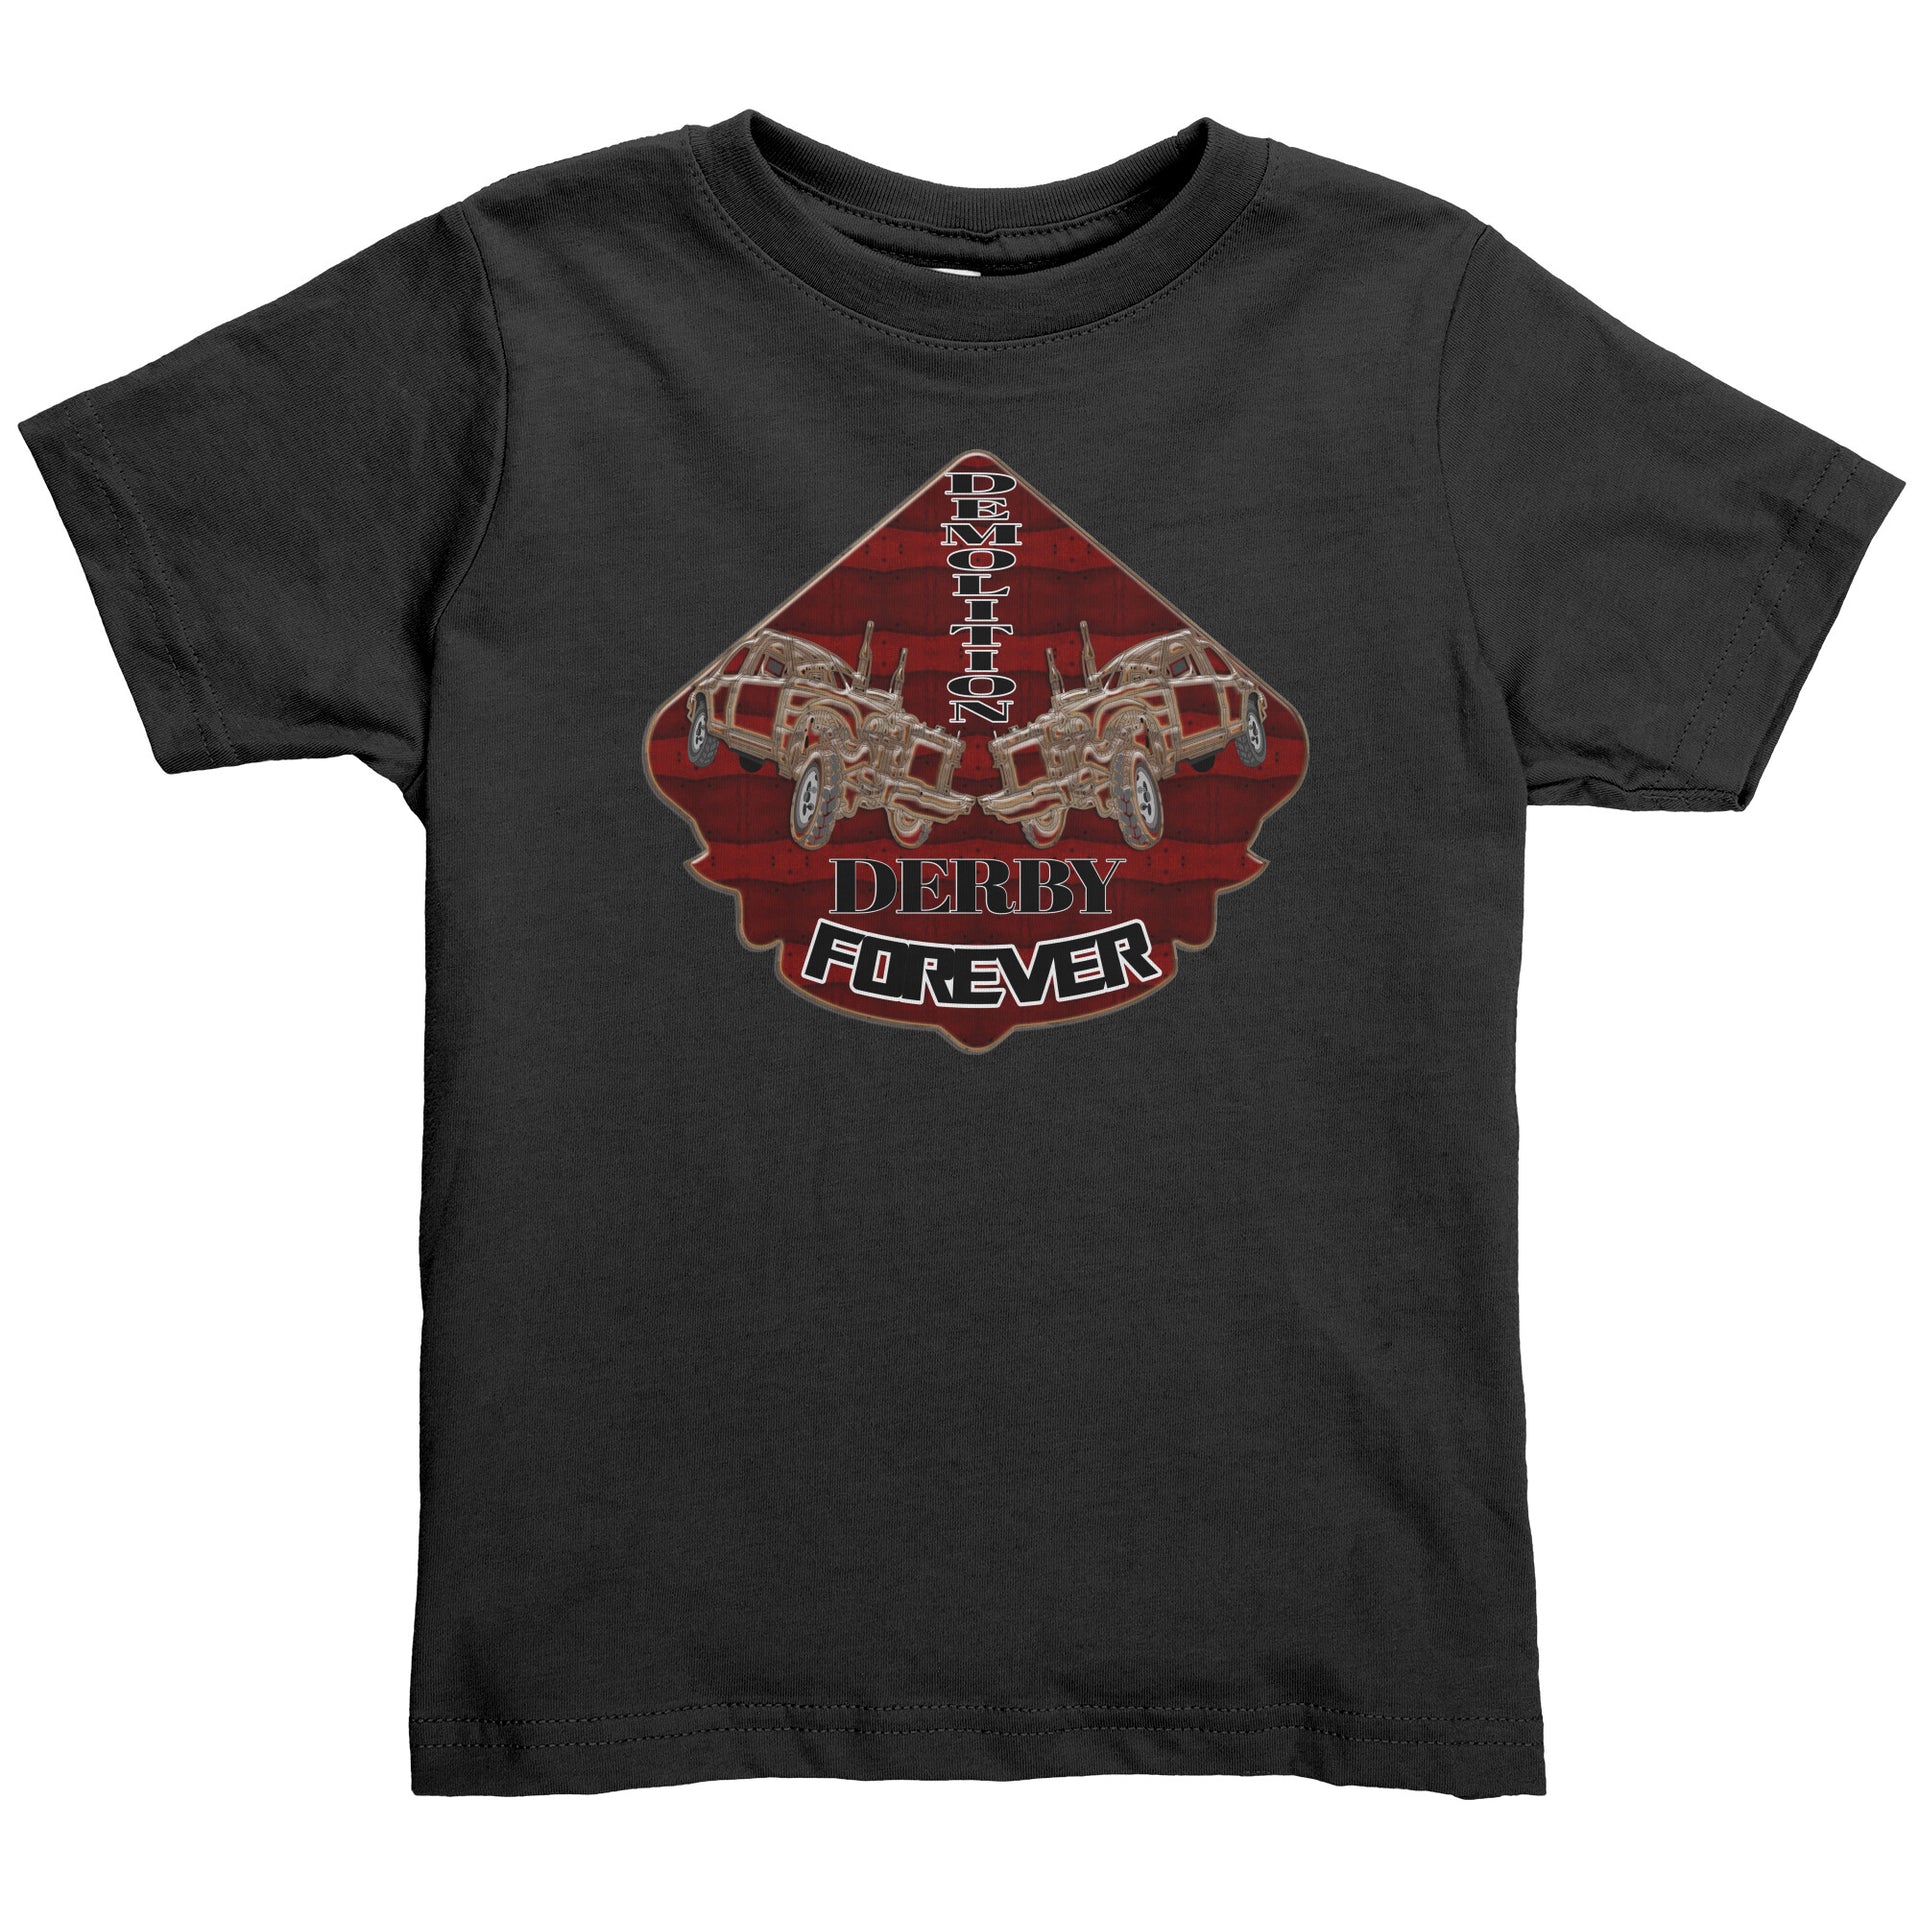 Demolition Derby Forever Baby T-shirts